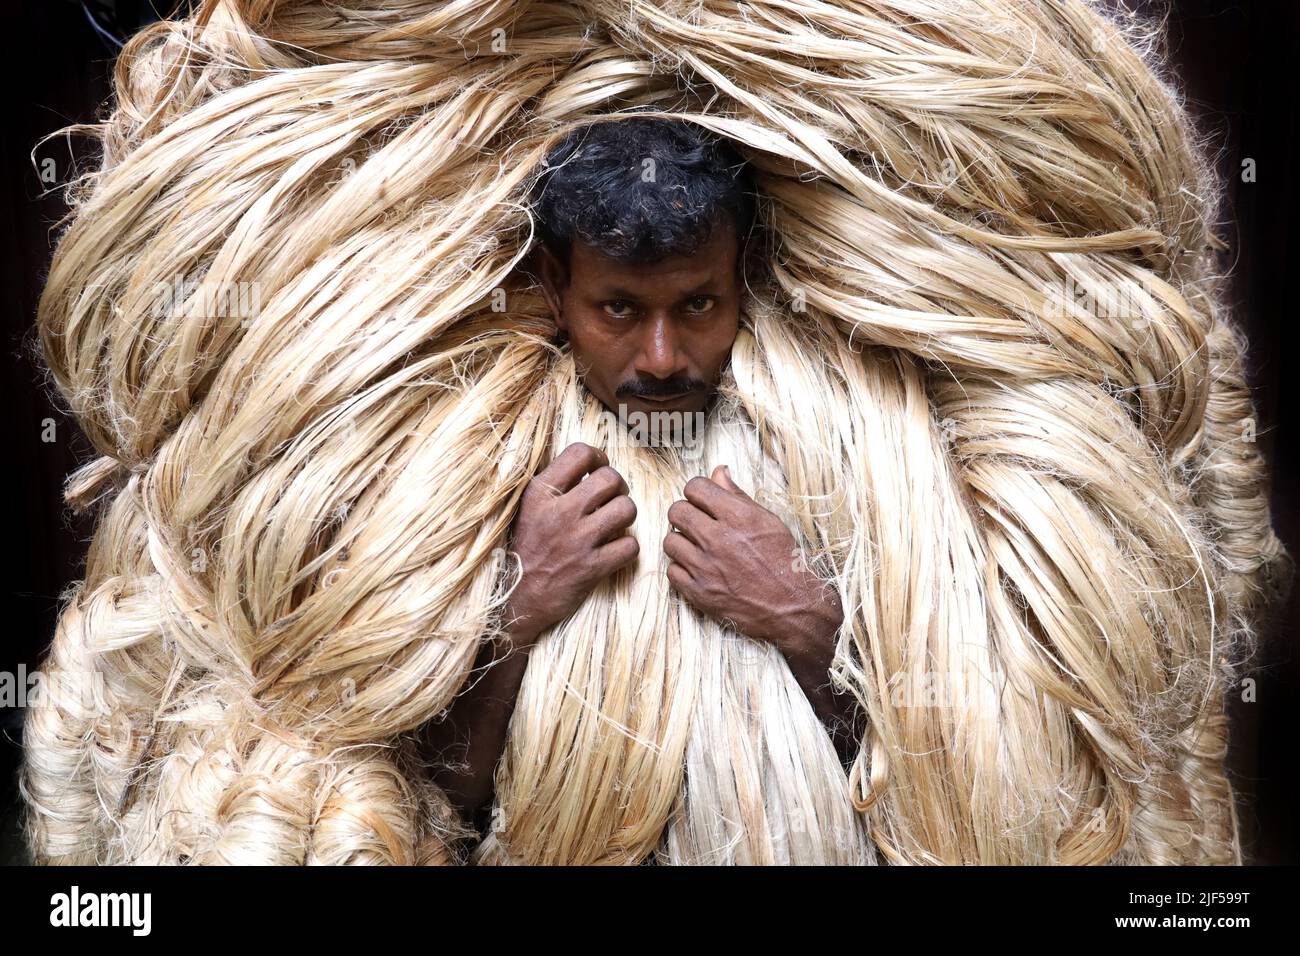 Manikgonj, Bangladesh. 29th June, 2022. A man is carrying a load of jute  weighing 50 kg on his head. Bangladesh is the second largest producer of  jute in the world. Jute is